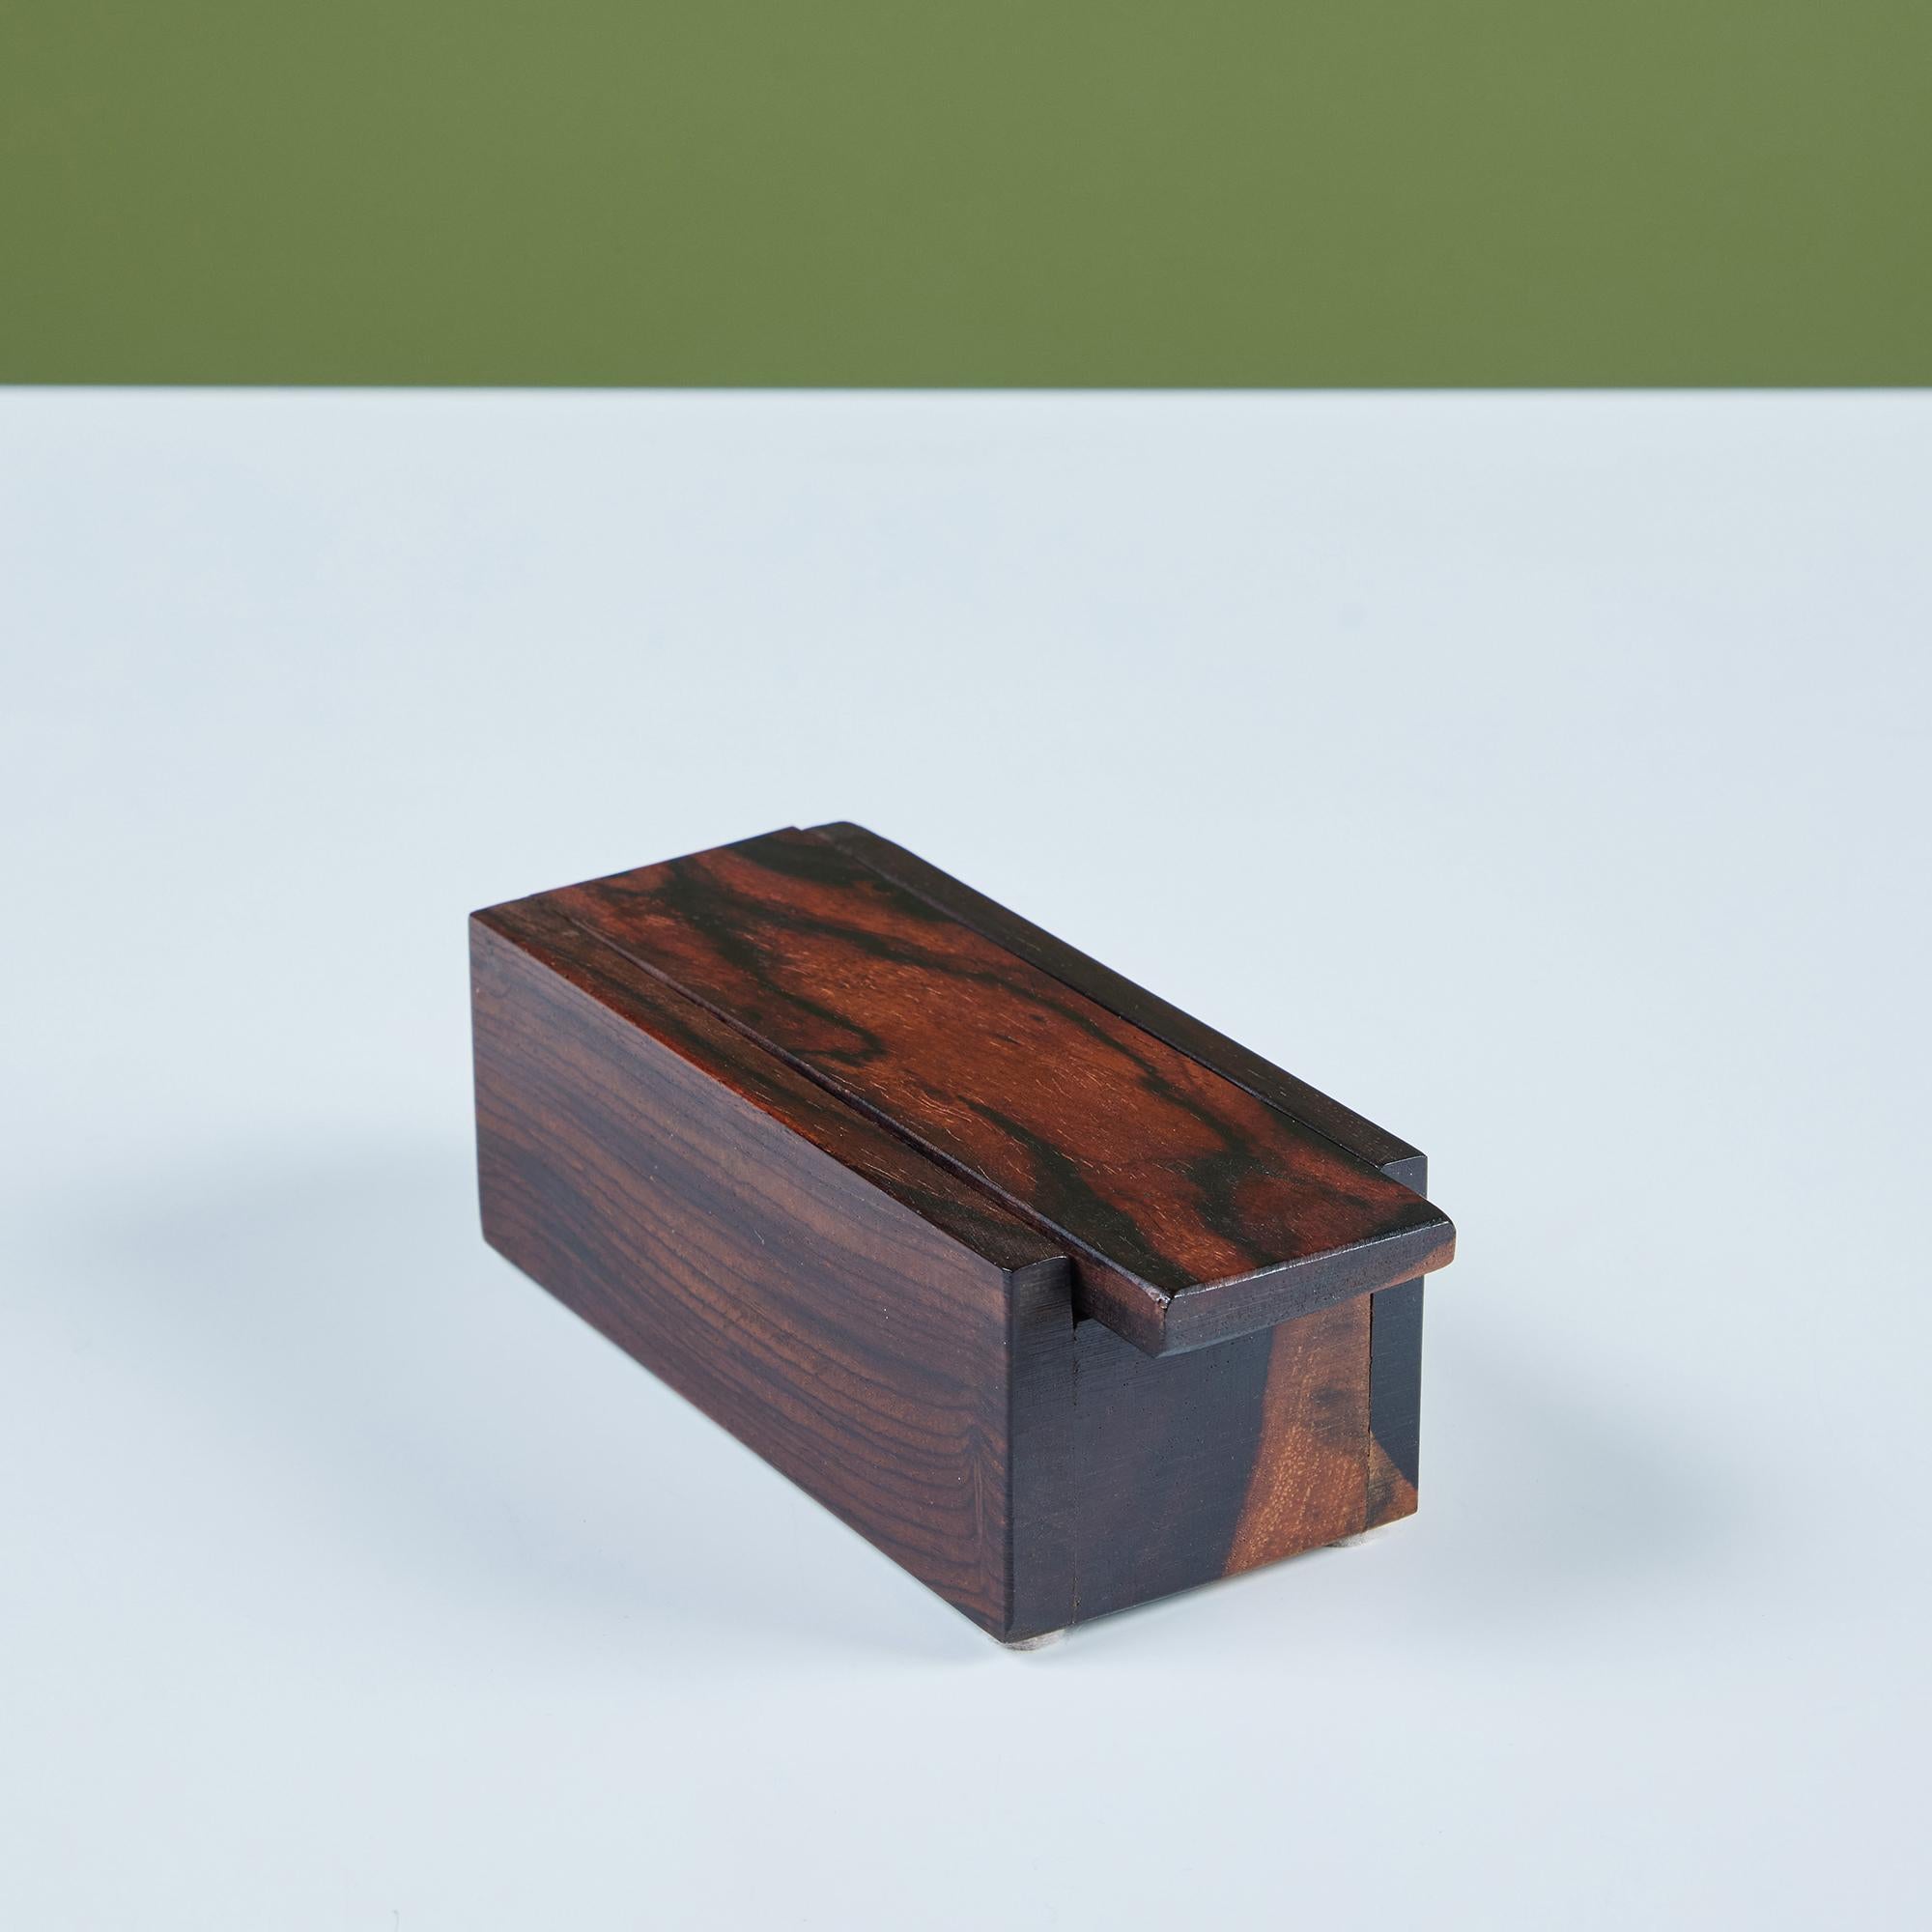 Rectangular Cocobolo box by Don Shoemaker for his company Señal, c.1960s, Mexico. Shoemaker is known for his use of exotic Mexican hardwoods and this hinged lid box is a beautiful example of his work.

Dimensions
5.75” width x 2.5” depth x 2”